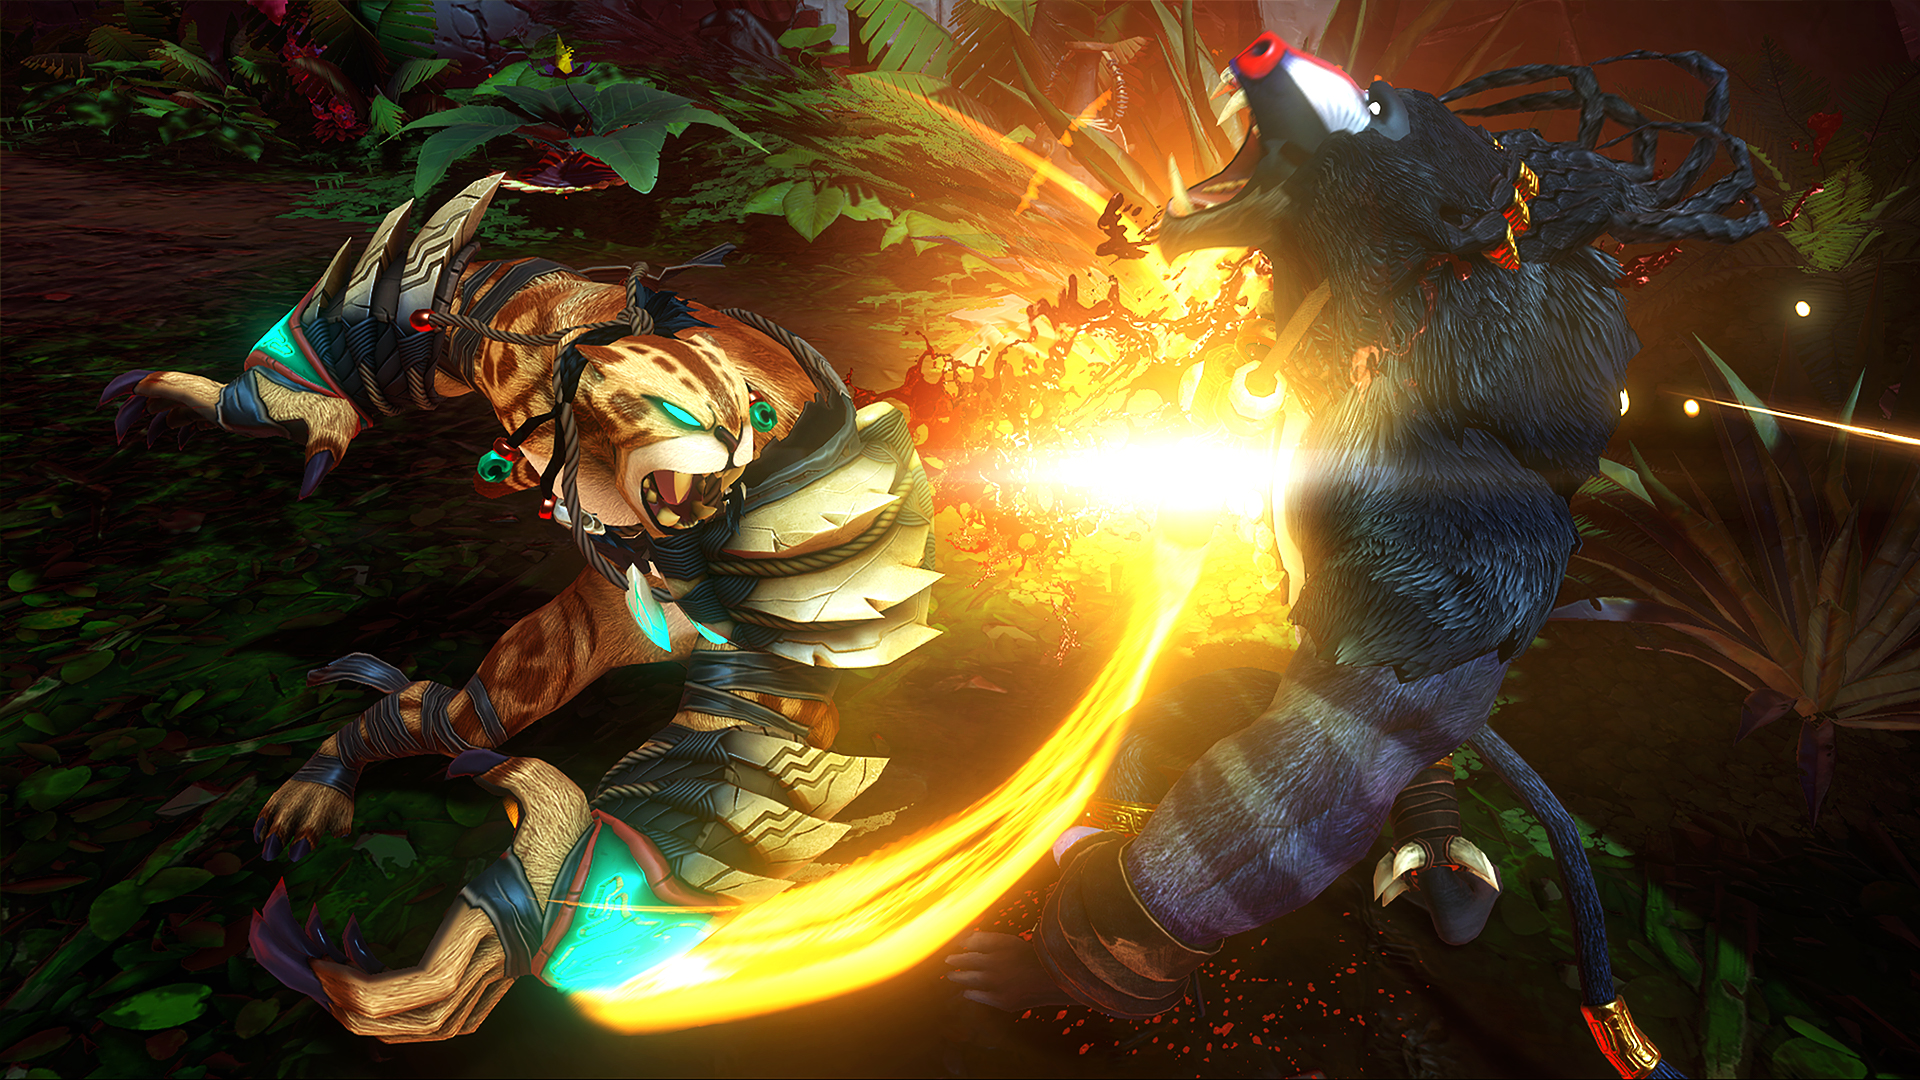 Feral Rights from Insomniac Games, for the Oculus Rift